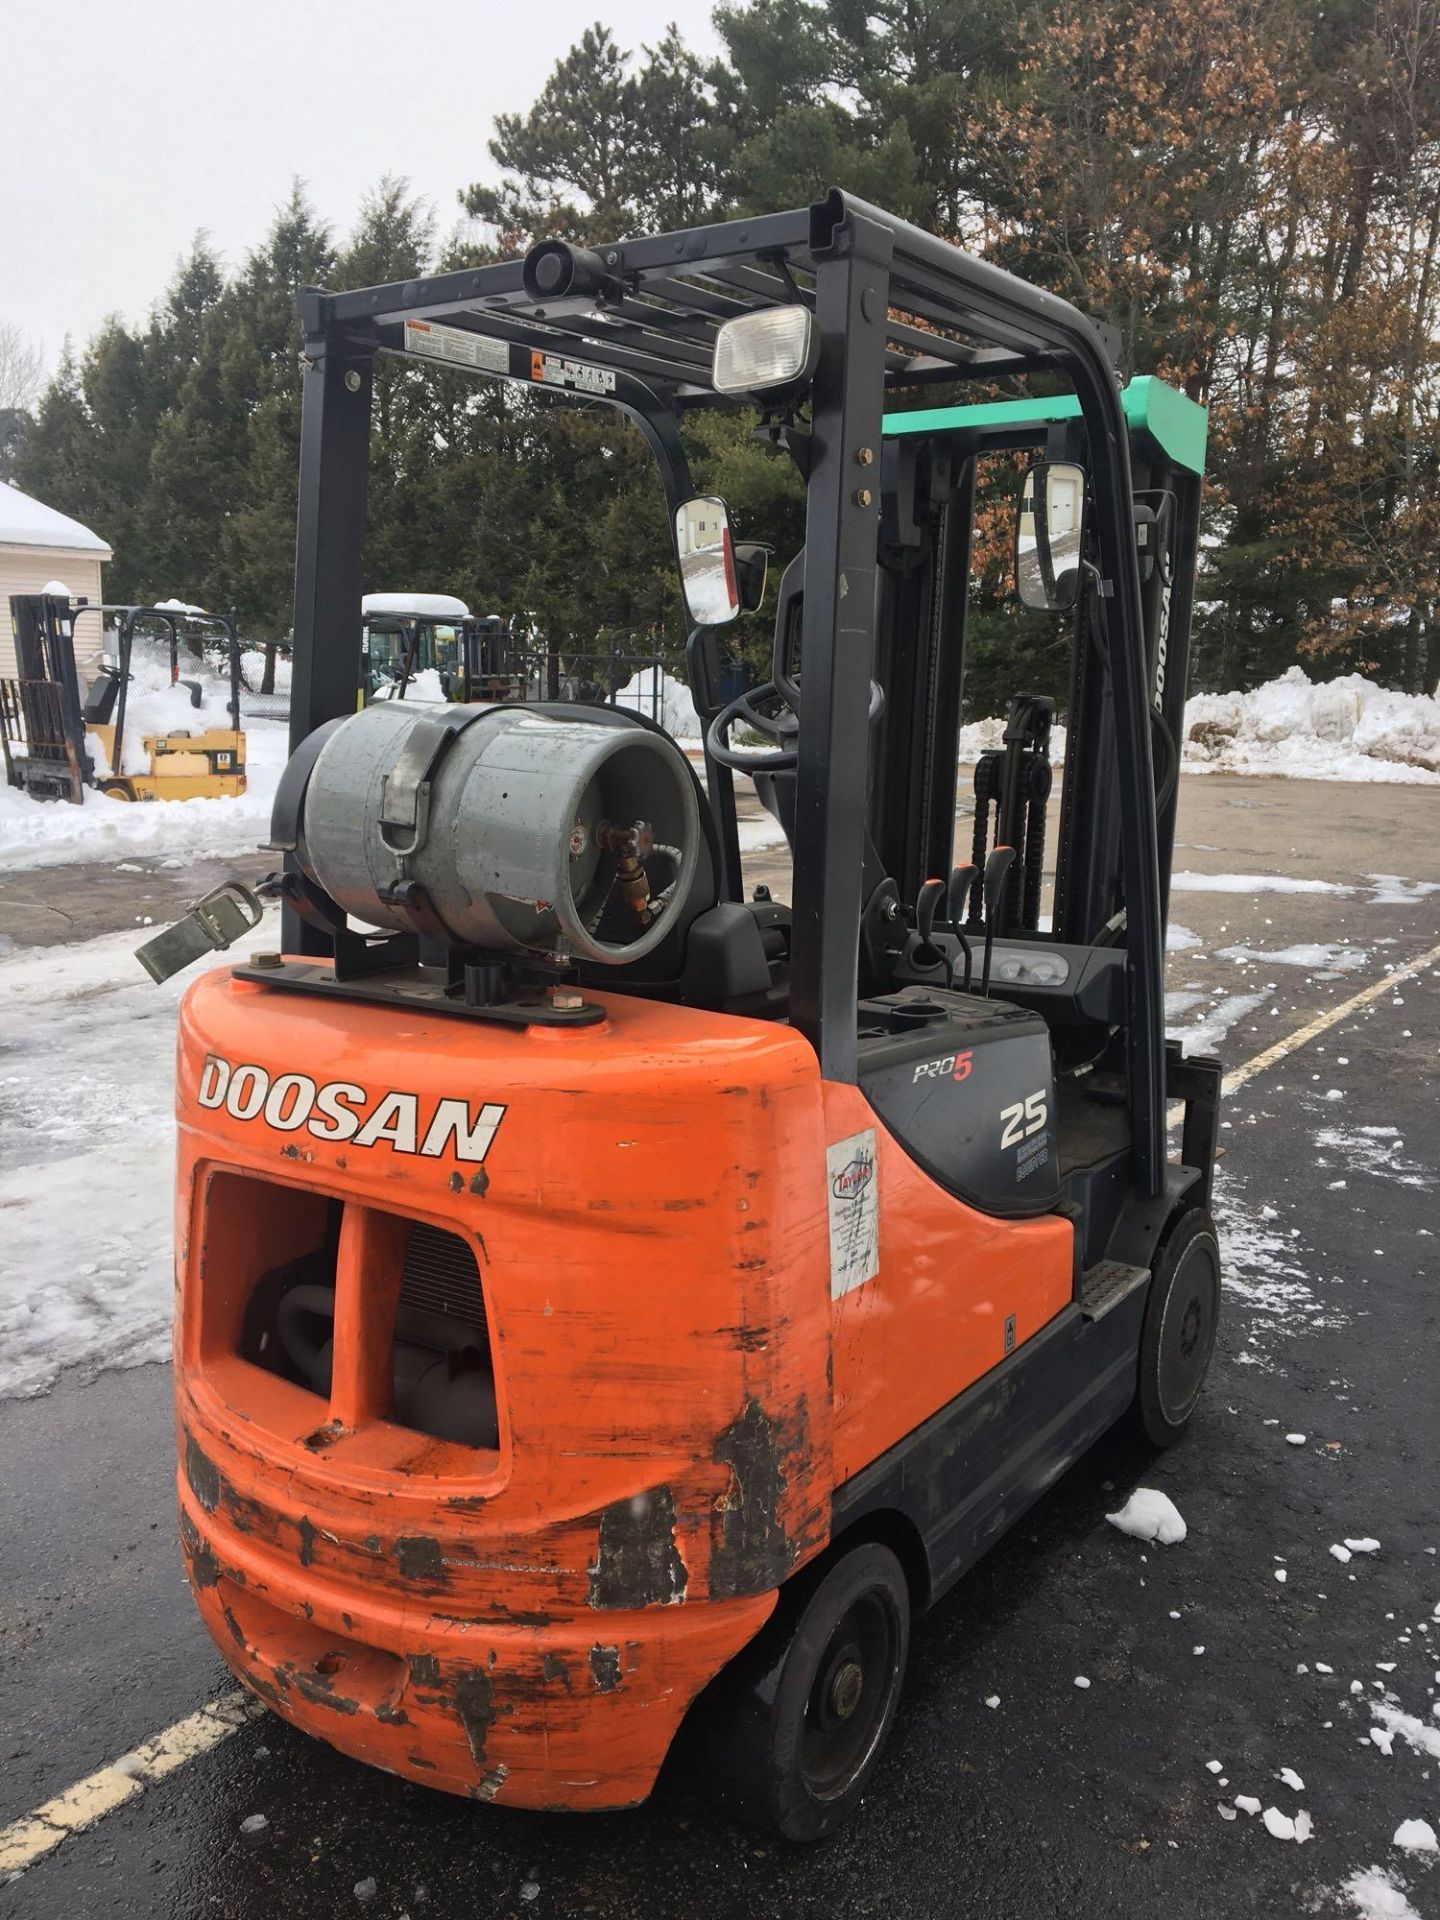 Propane Forklift, Doosan, GC25P-5, Max Ht 189", Max Cap 4300lbs, Hrs 3081 Started and Moved - Image 4 of 11